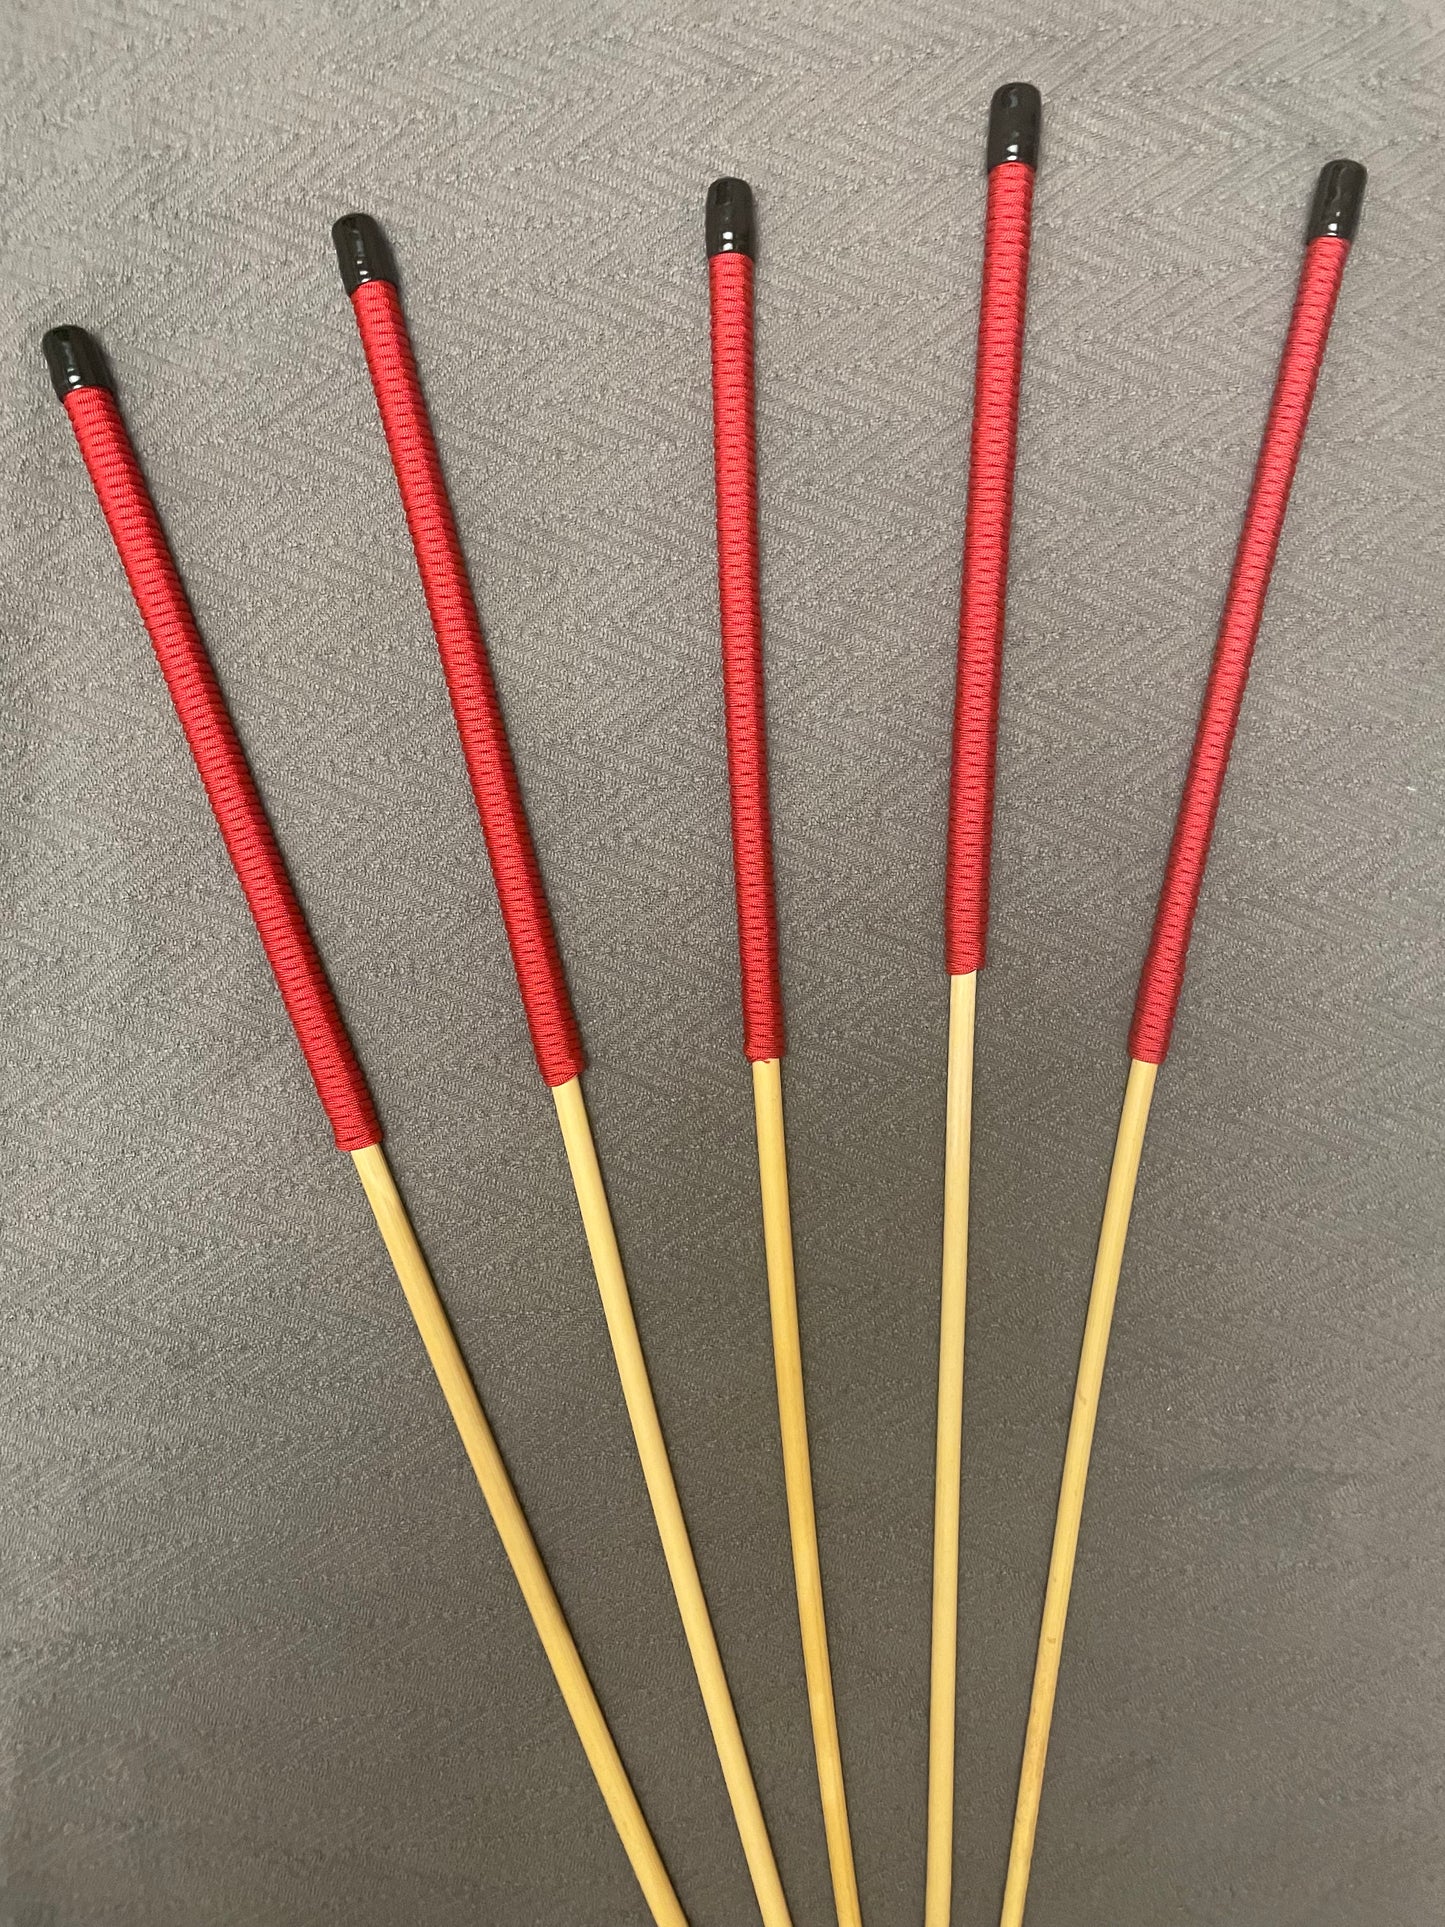 Set of 5 Knotless Dragon Canes / Ultimate Canes / No Knot Canes / BDSM Canes - 90 to 92 cms Length - Imperial Red Paracord Handles